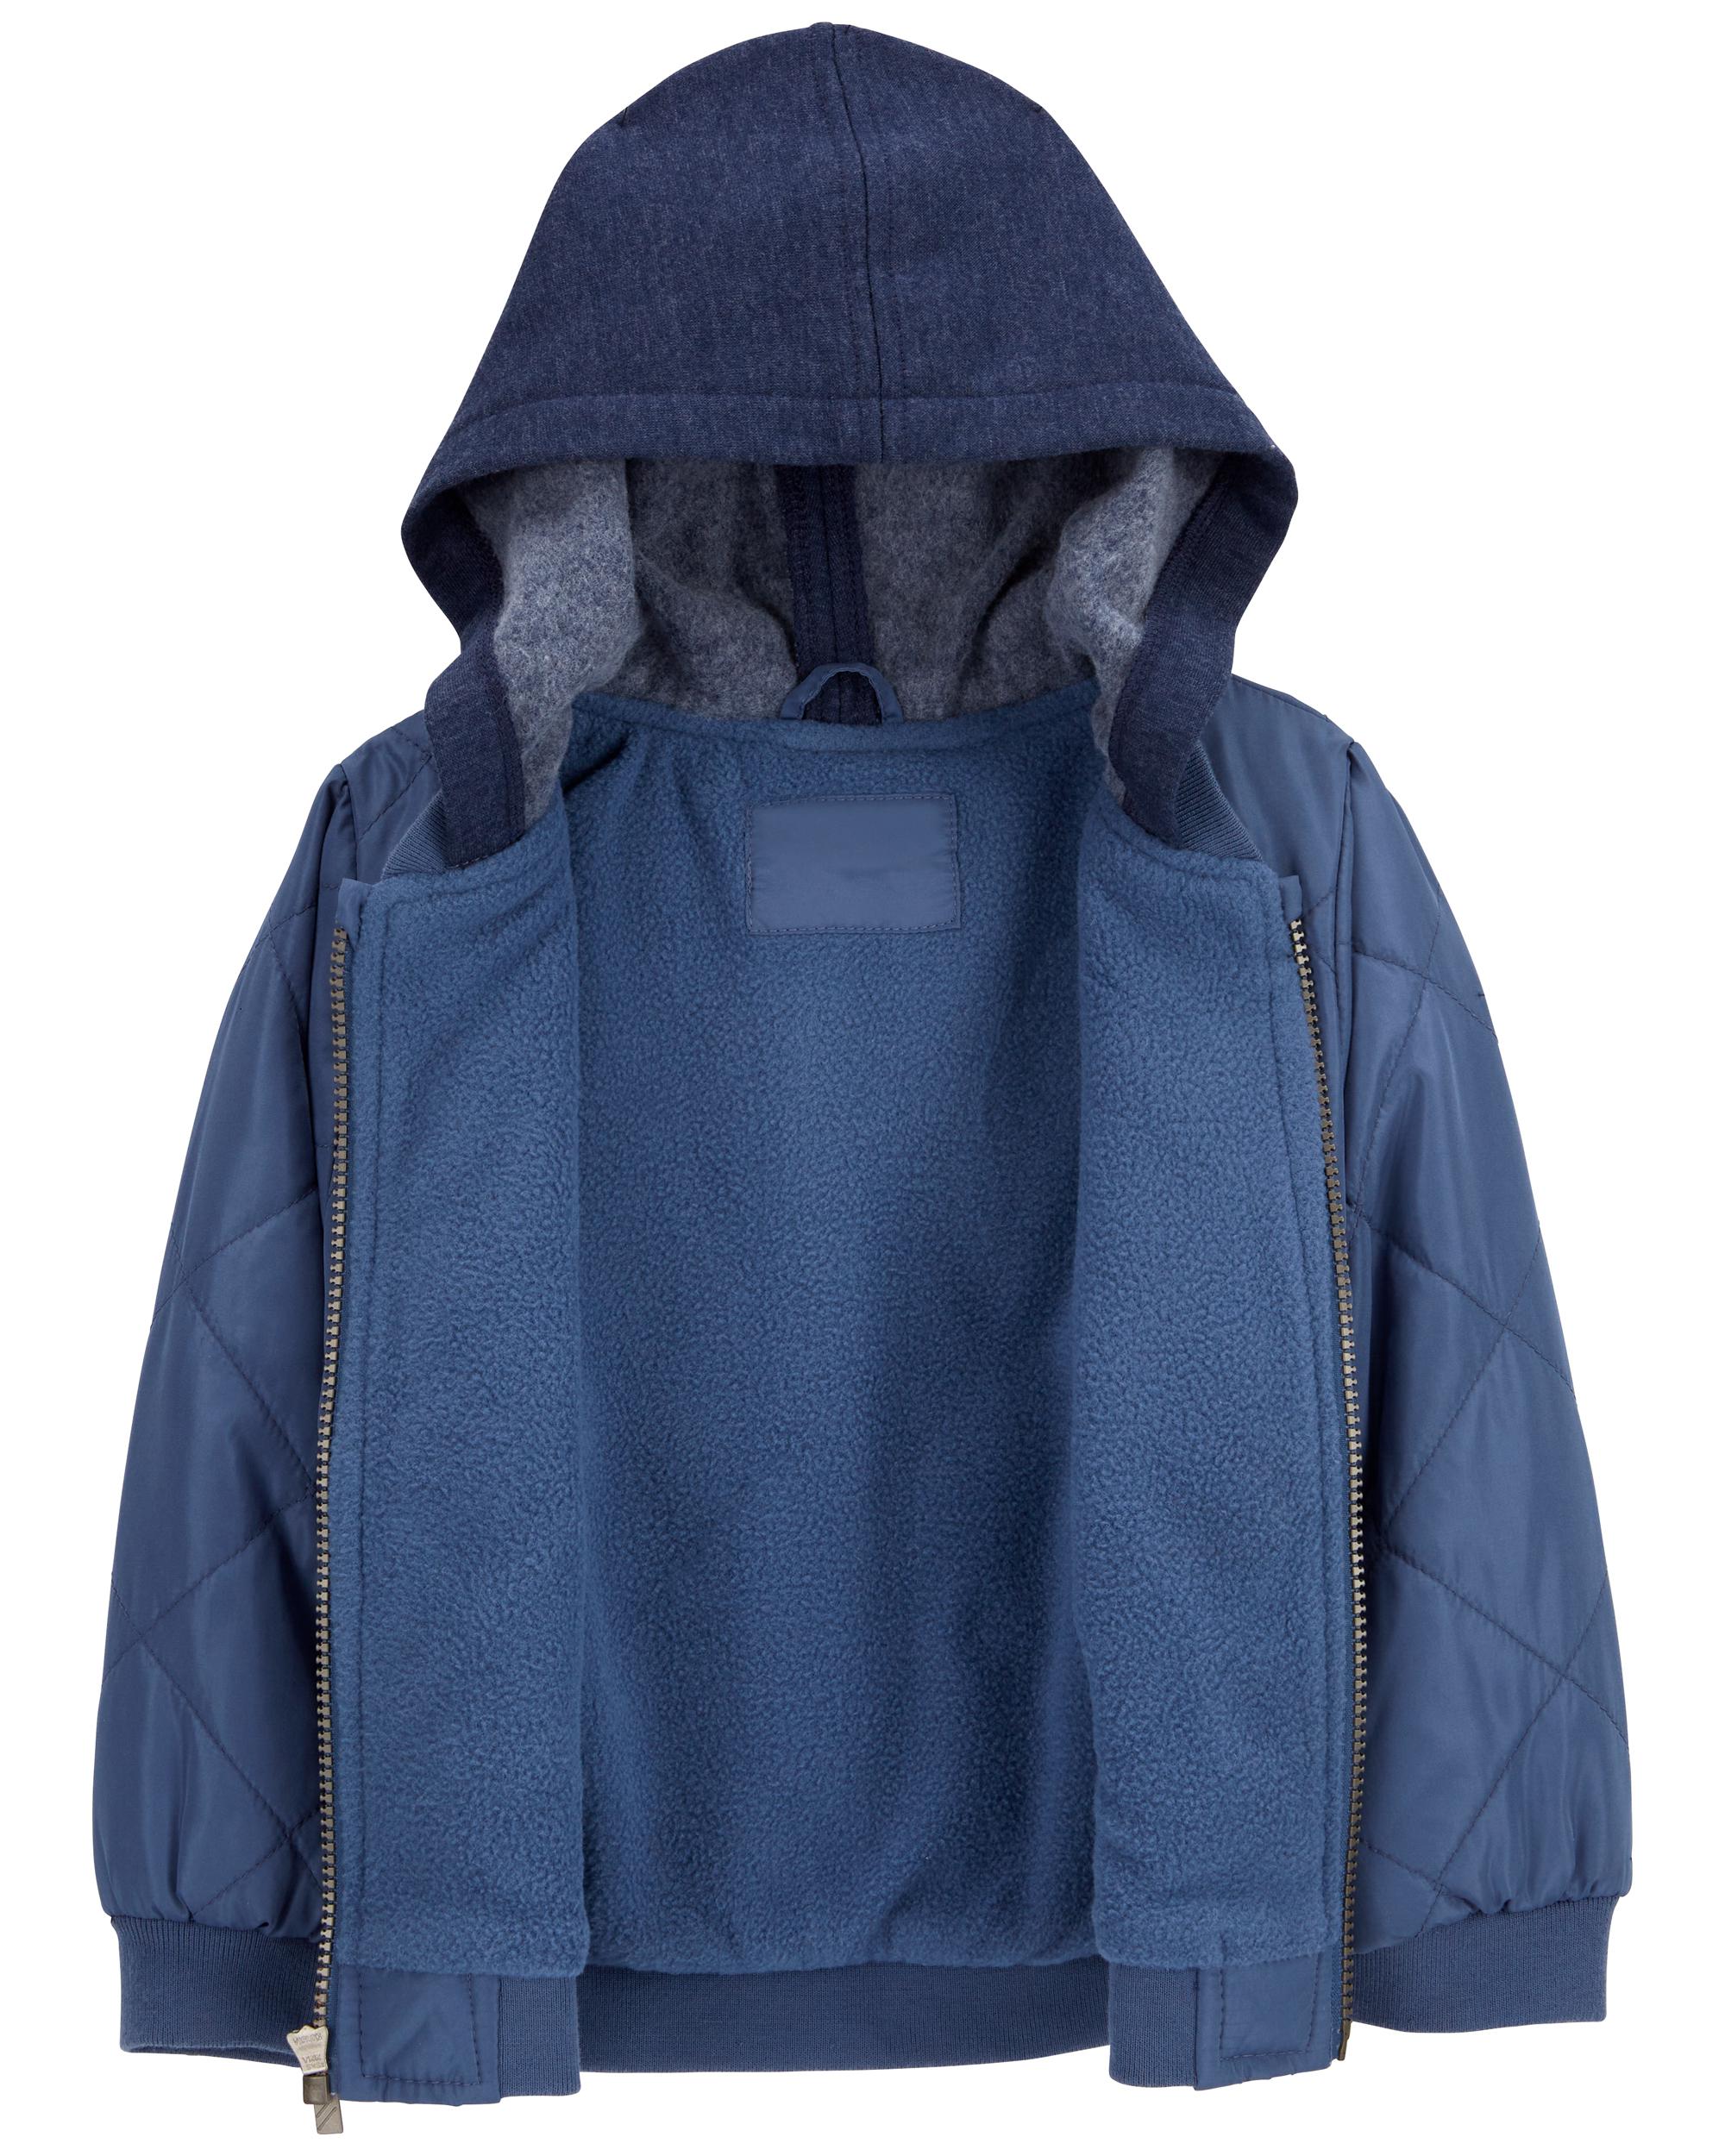 Toddler Quilted Fleece Lined Jacket